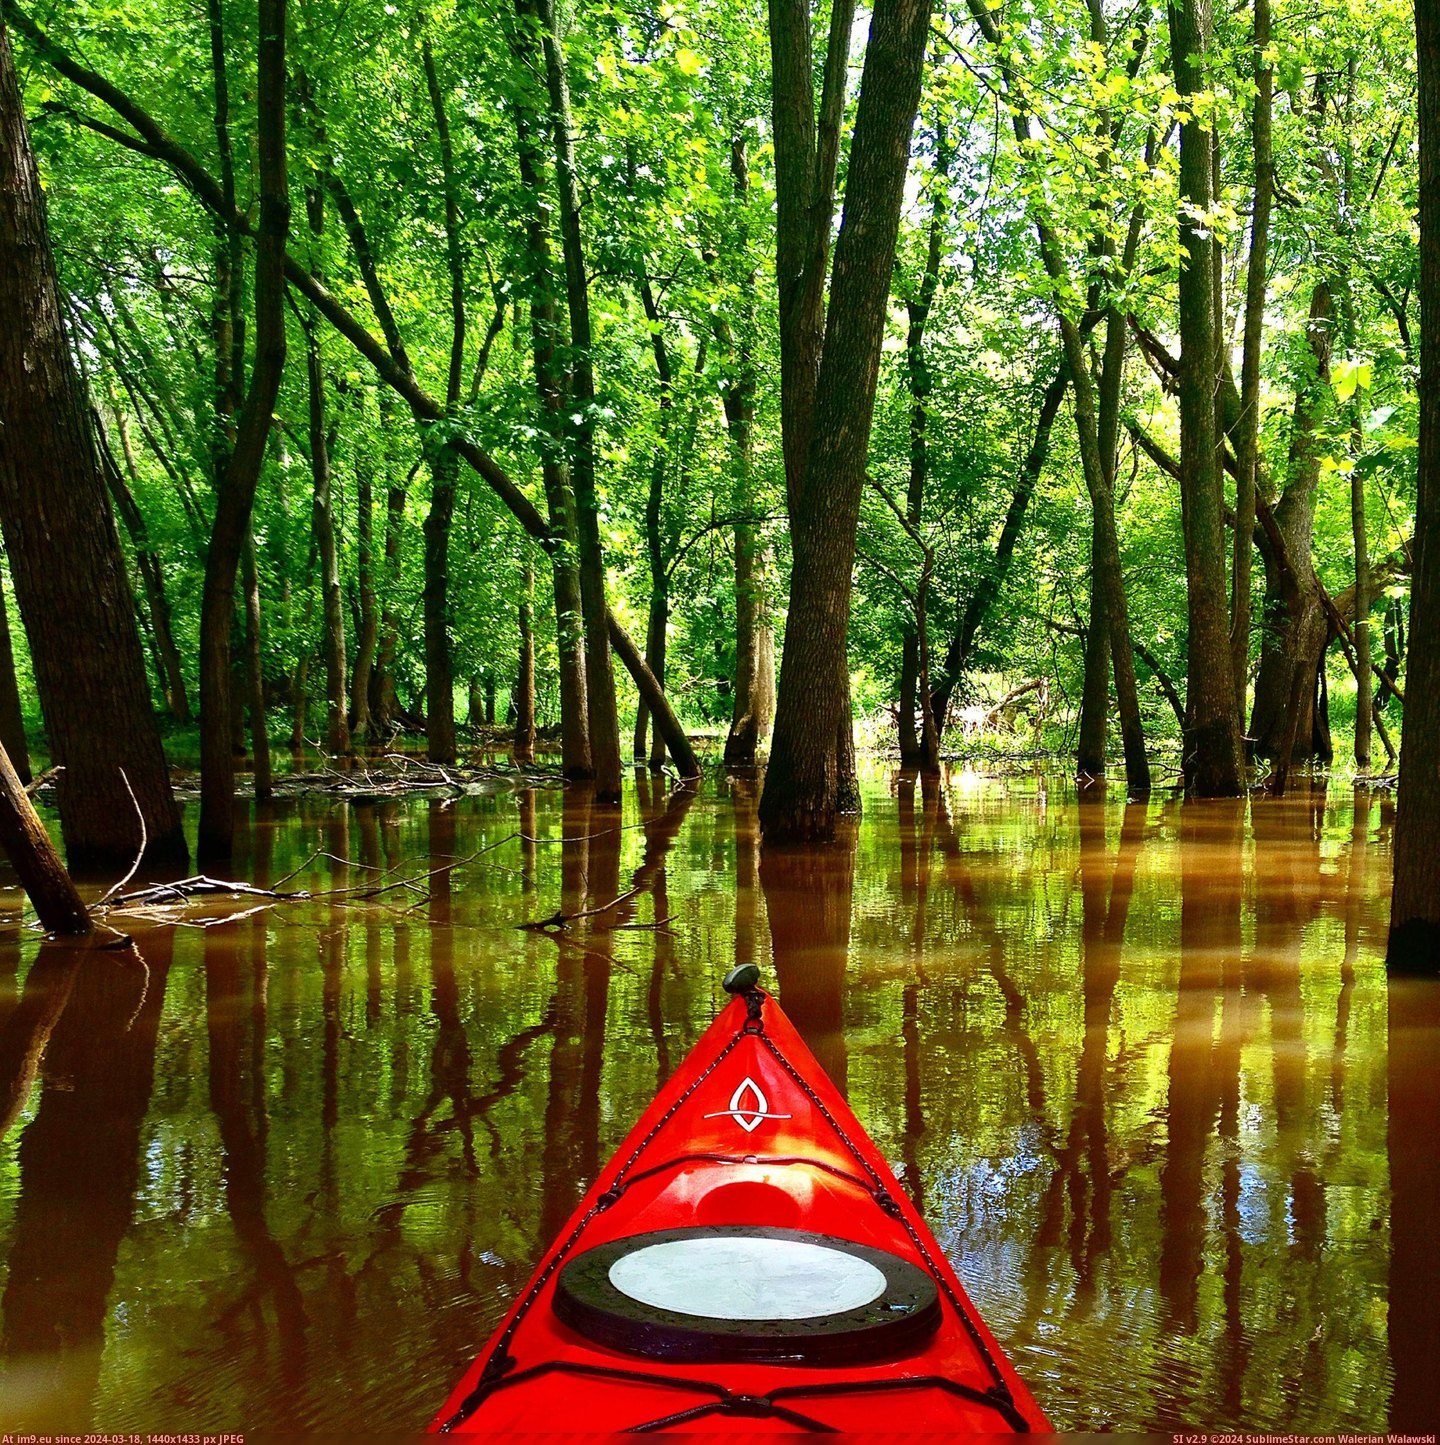 #Day #Spent #Kayaking #Flooding #Forest #Area [Pics] There has been some flooding in my area recently so I spent the day kayaking through the forest Pic. (Bild von album My r/PICS favs))